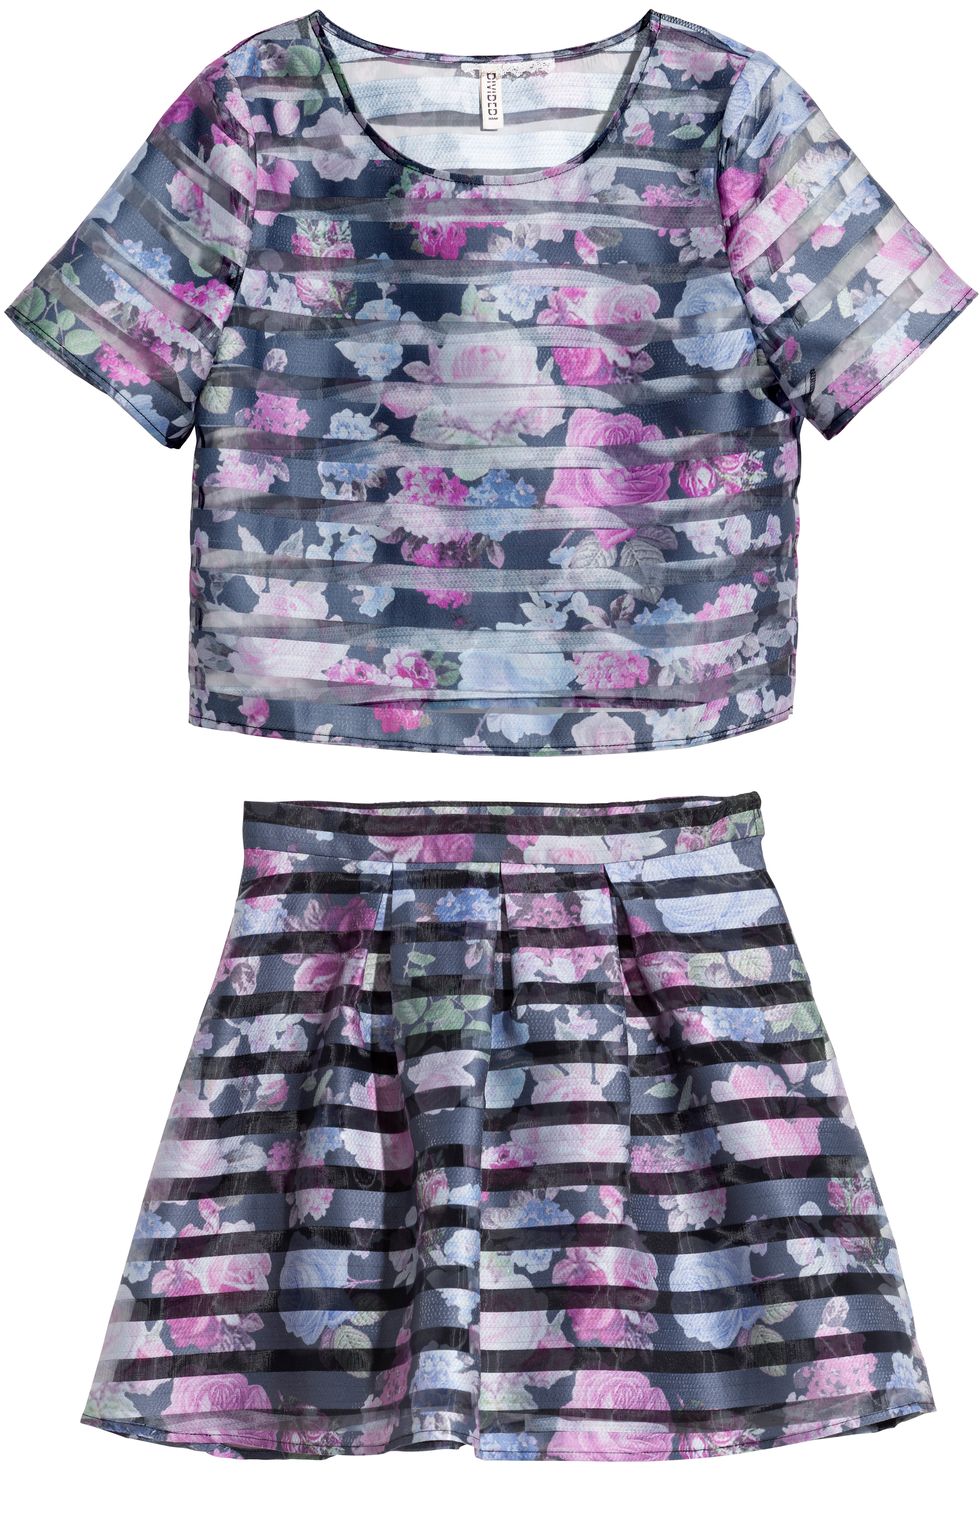 H&M floral sheer co-ord as worn on Taylor Swift - celebrity style photos - cosmopolitan.co.uk